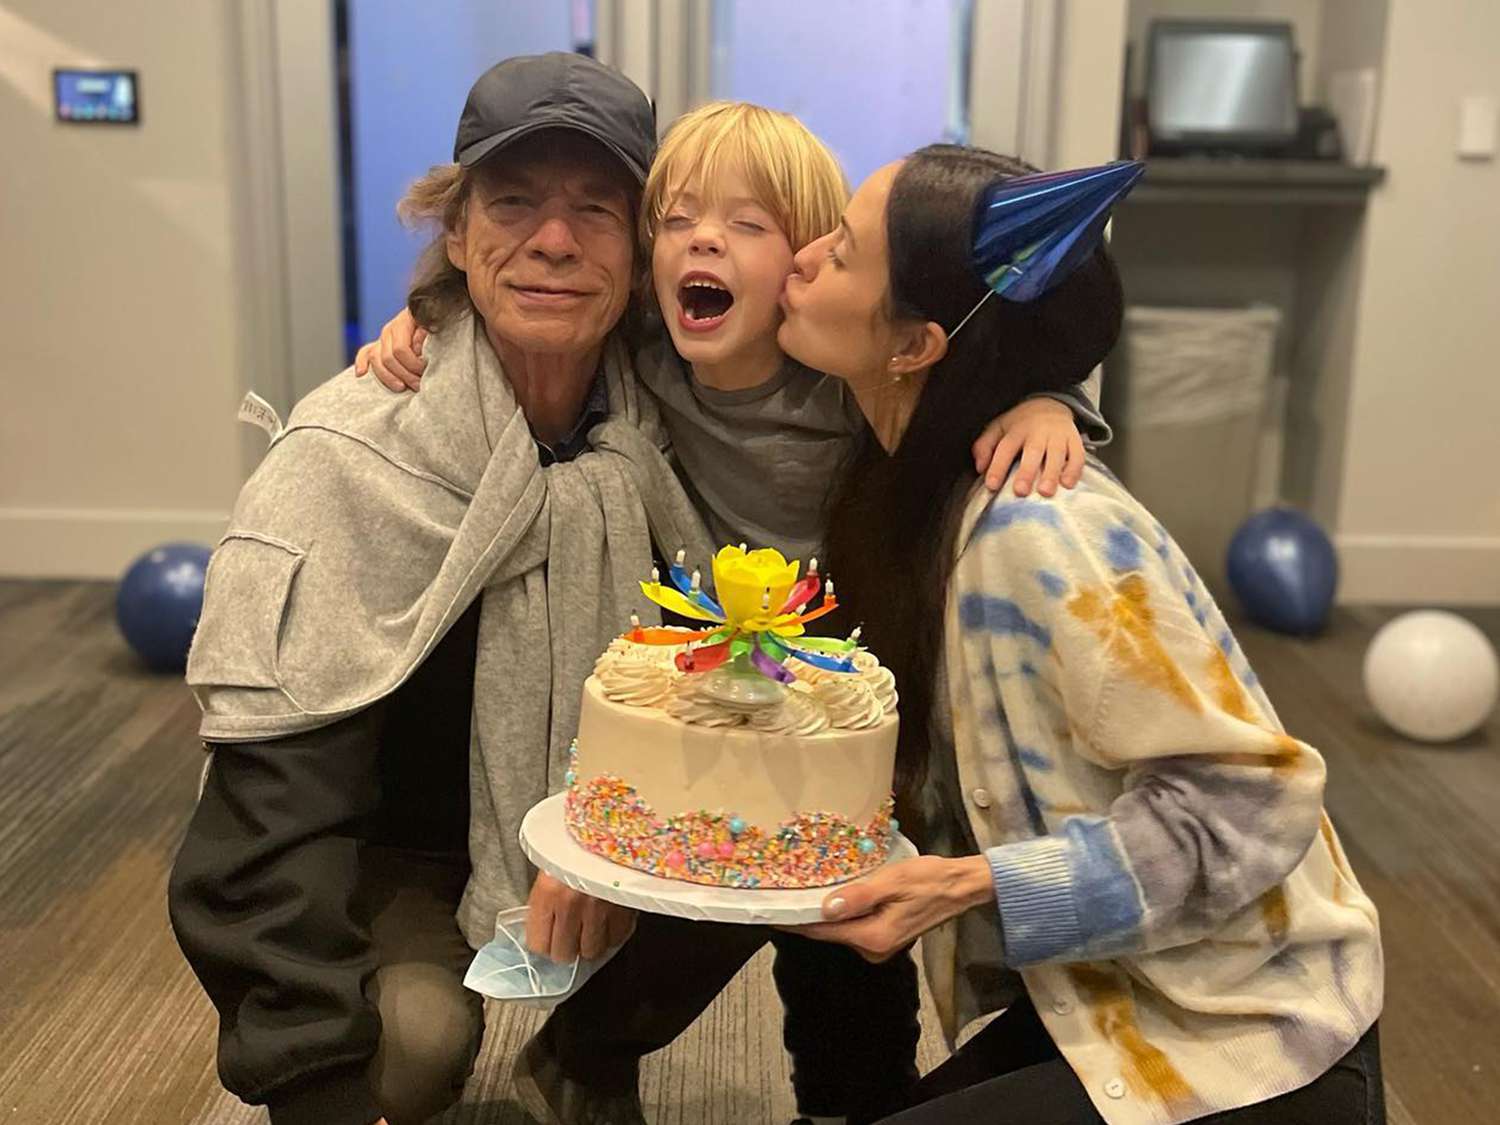 Mick Jagger and Melanie Hamrick Want to Keep Traveling with Son, 6